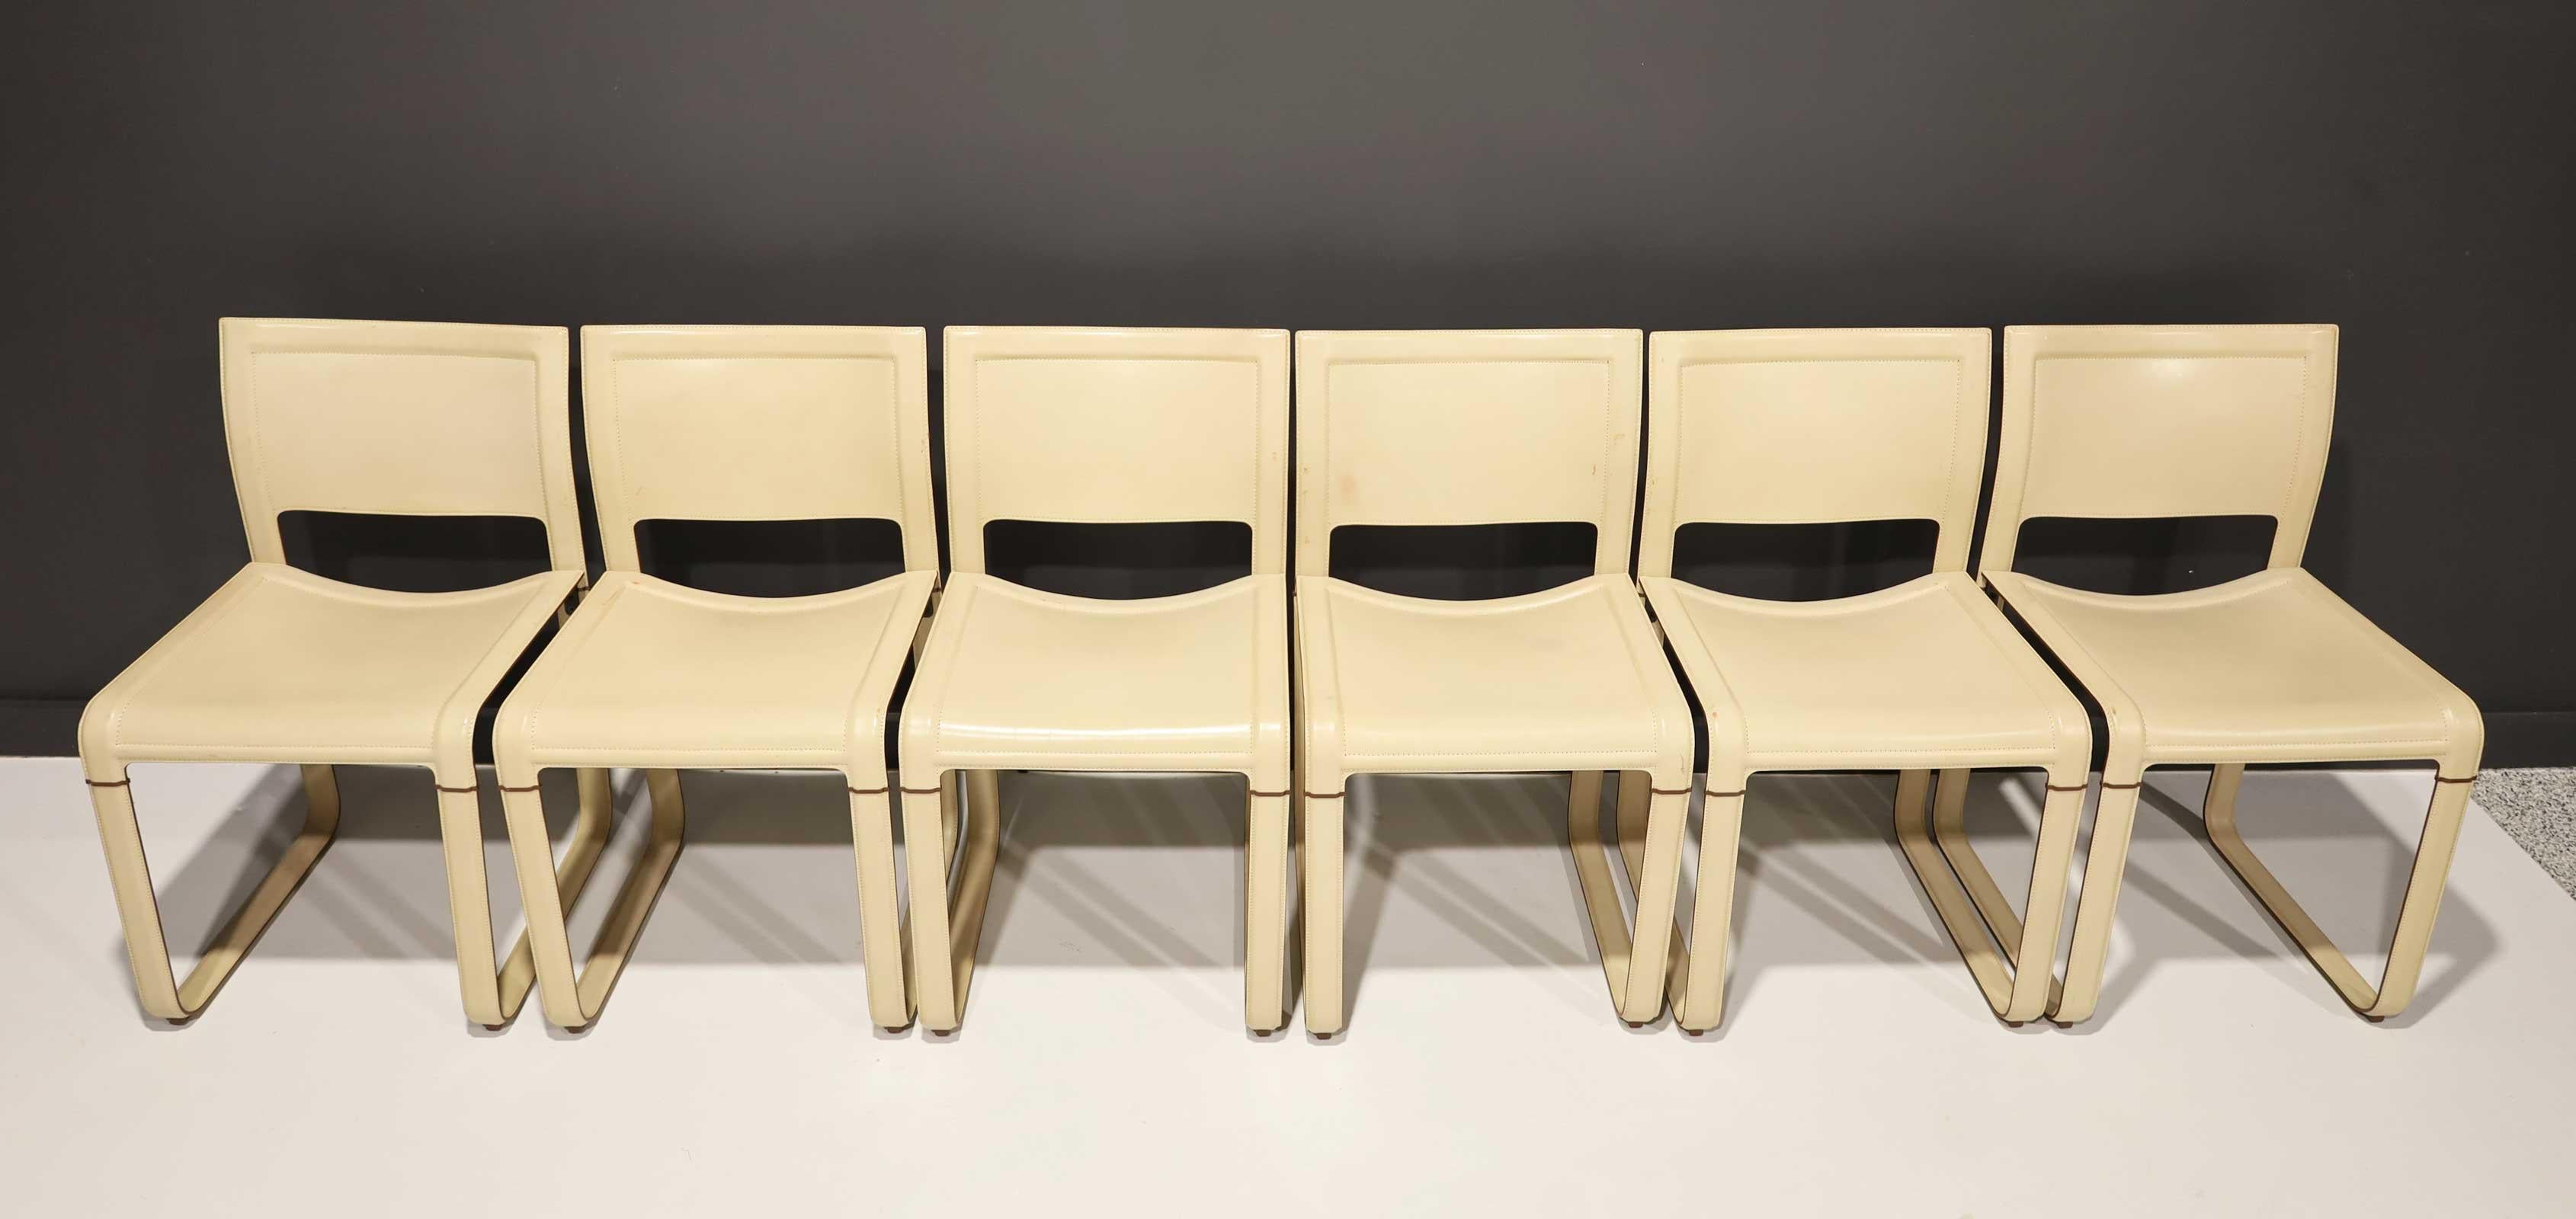 Beautiful set of leather chairs designed by Tito Agnoli for Matteo Grassi.